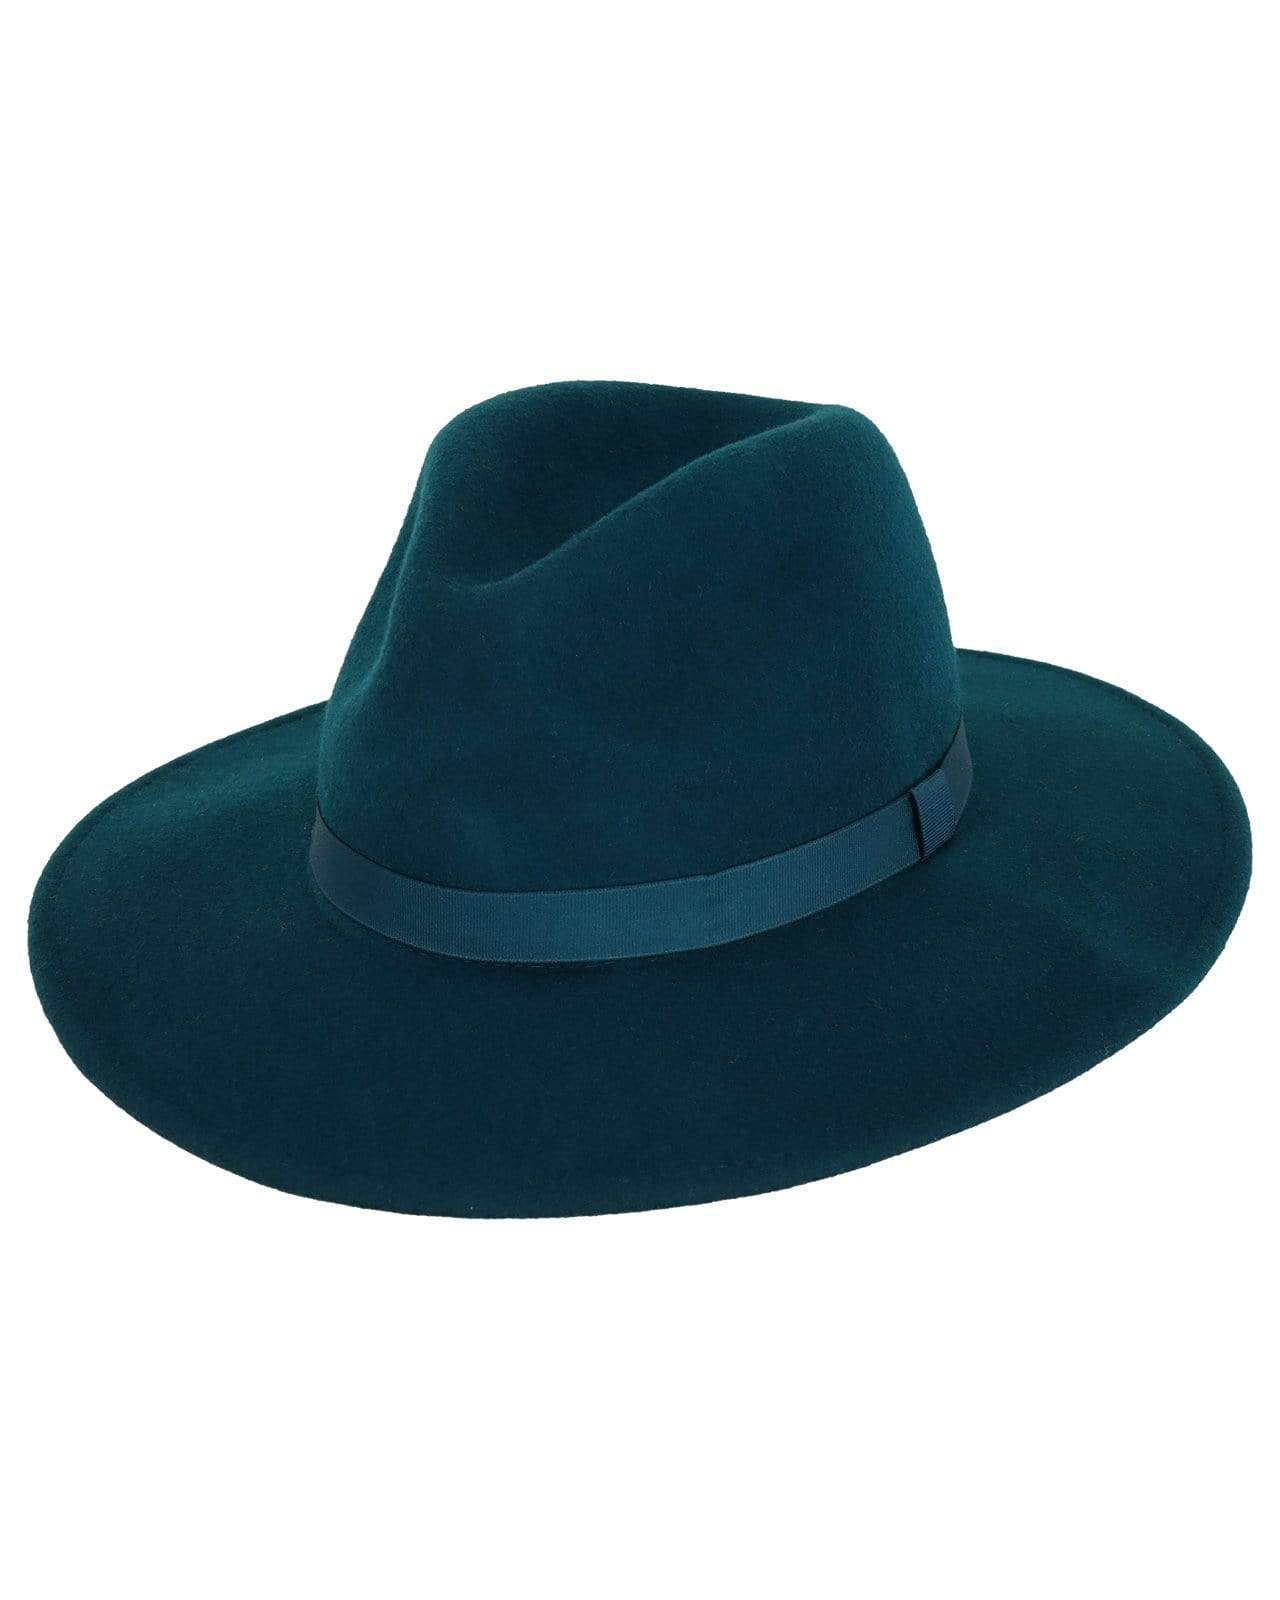 Outback Trading Company Prudence Willow / S 1157-WIL-SM 789043337754 Hats